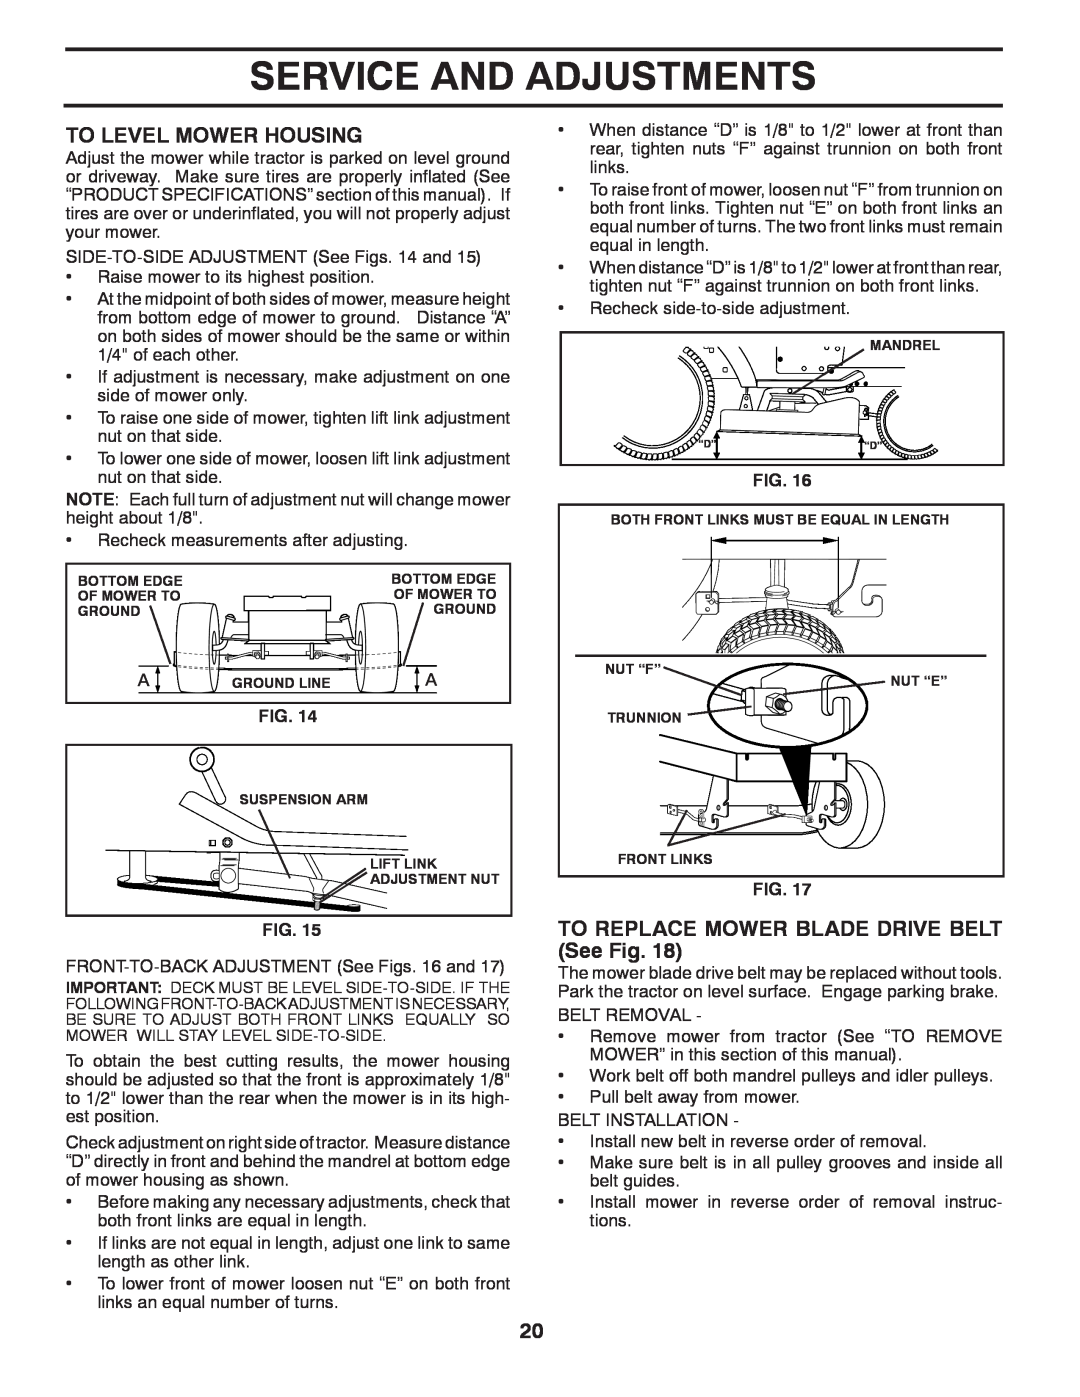 Murray 96017000700 manual To Level Mower Housing, TO REPLACE MOWER BLADE DRIVE BELT See Fig, Service And Adjustments 